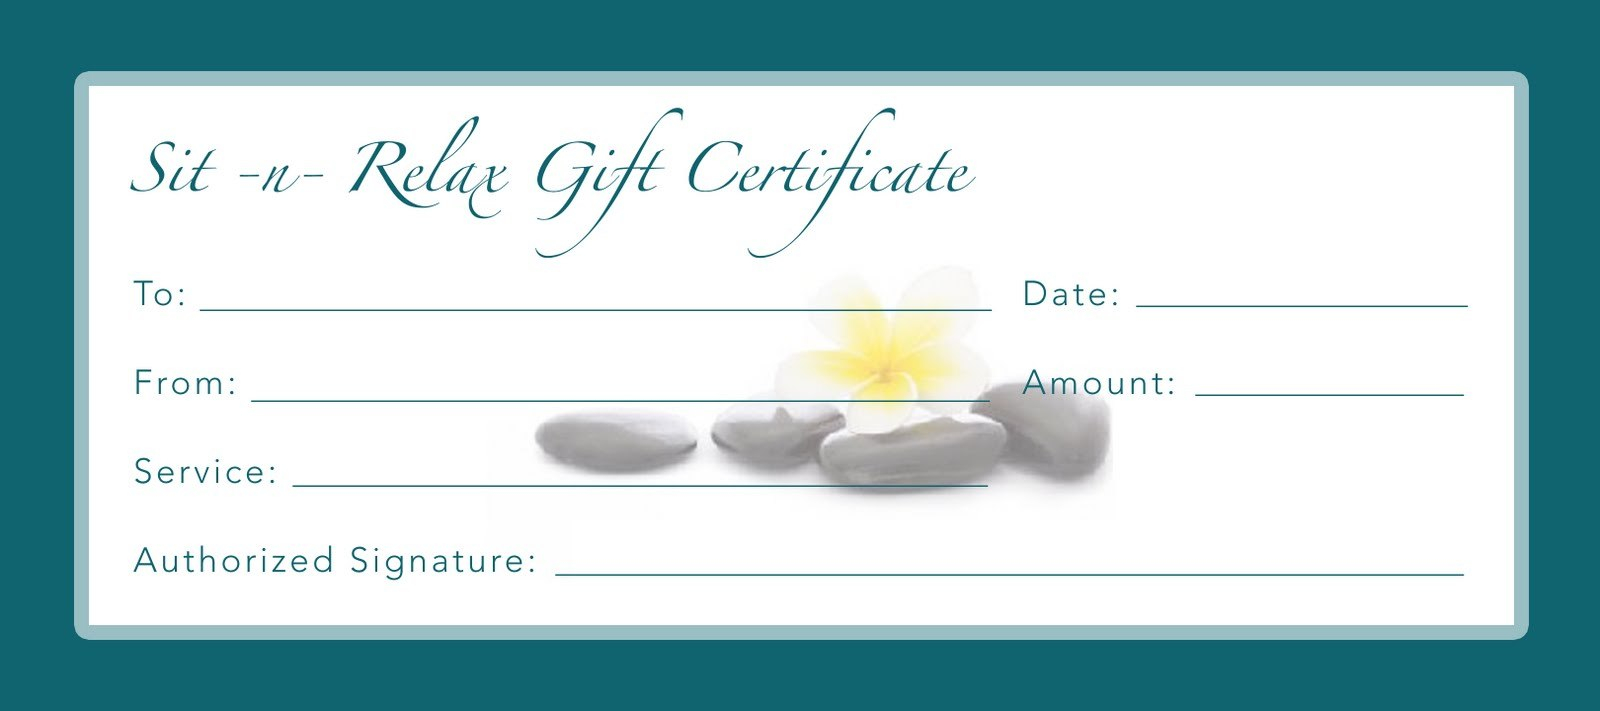 Images Of Spa Gift Certificate Template  Krydia inside Massage Gift Certificate Template Free Download